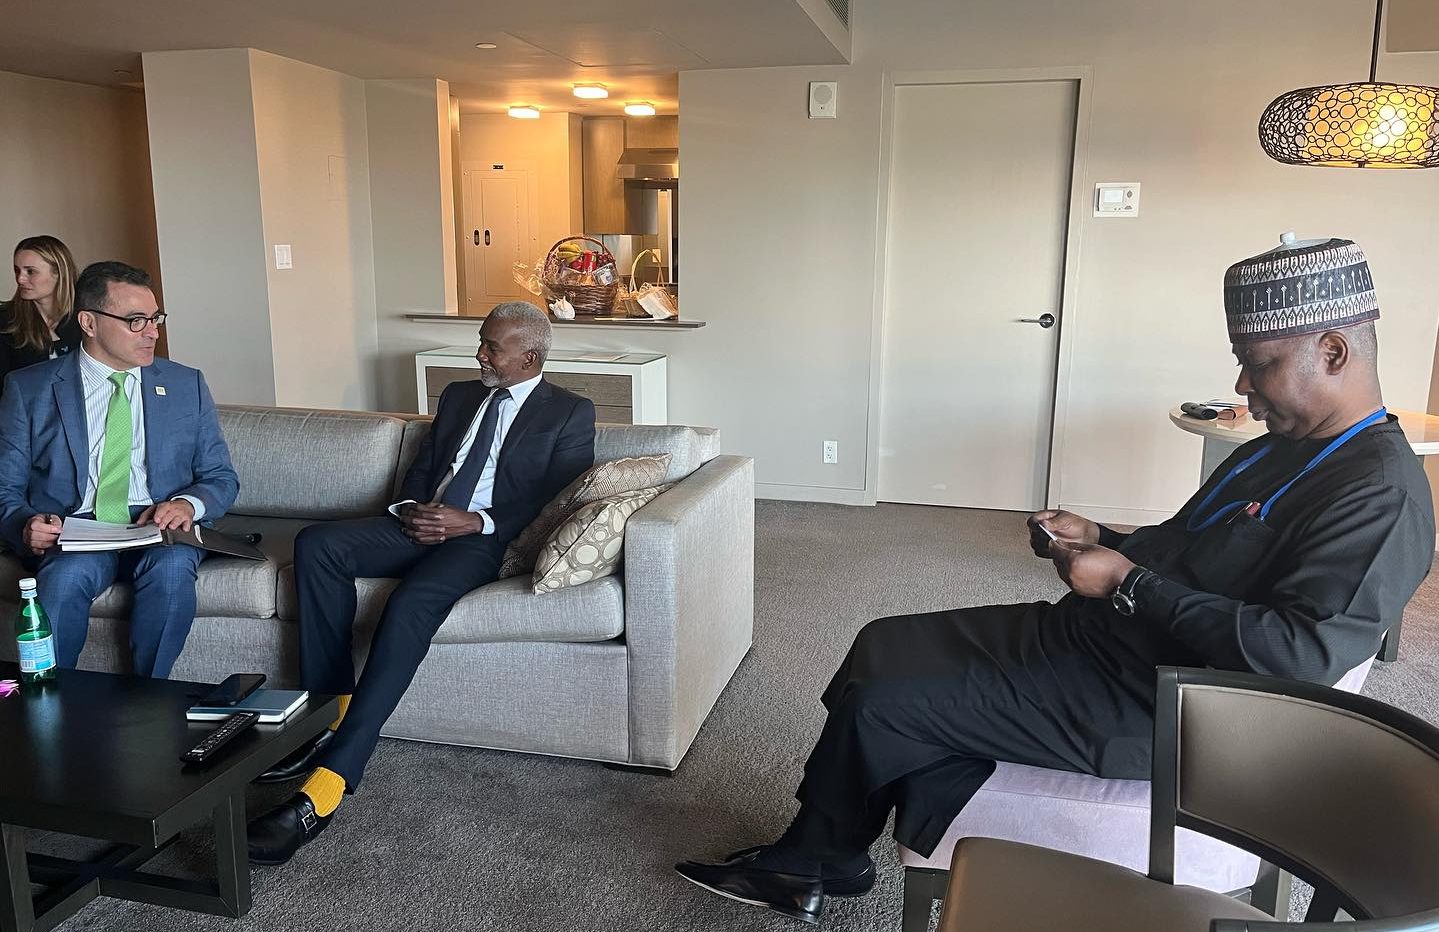 H.E. Yusuf M. Tuggar (OON) in the company of Amb. Tijjani Muhammad-Bande, Nigeria’s Perm. Rep. to the UN, met with the delegation of International IDEA